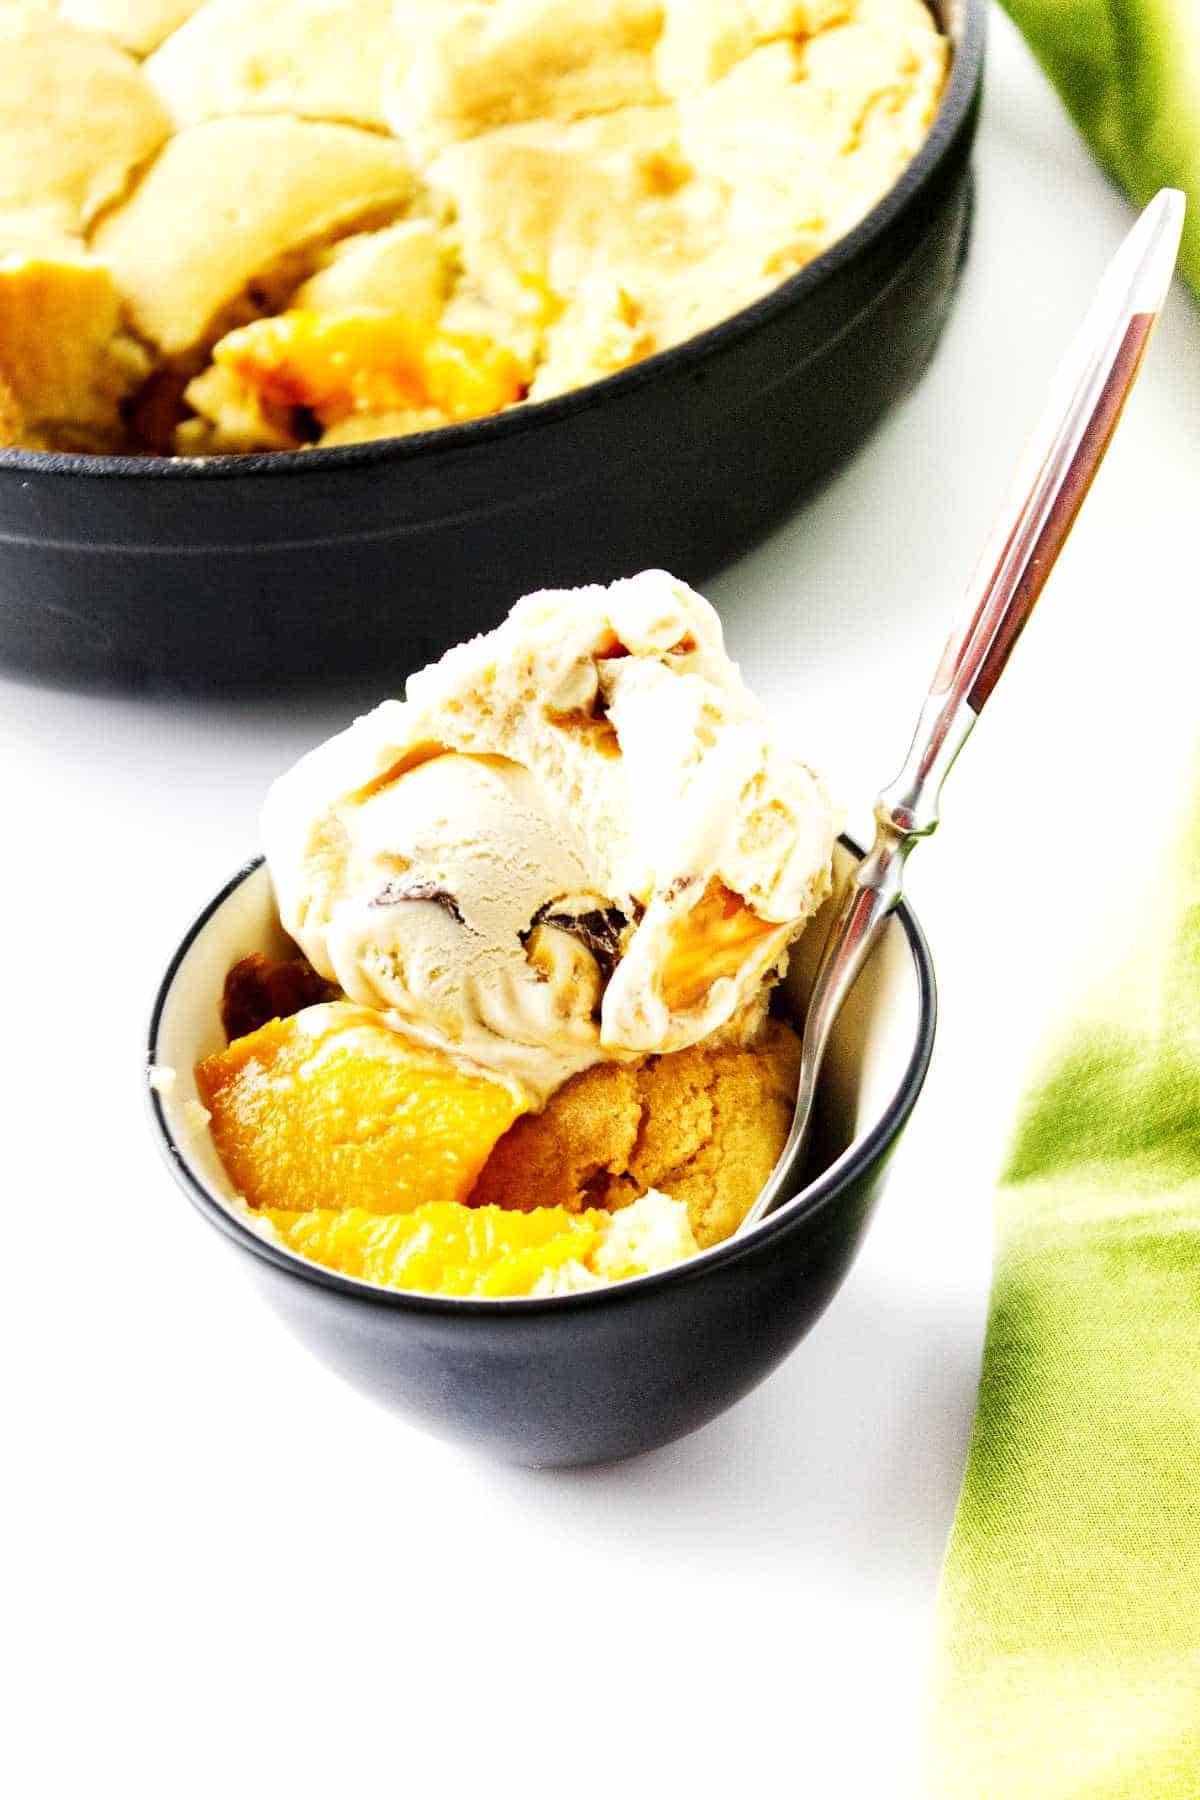 peach cobbler in a bowl with ice cream on top.